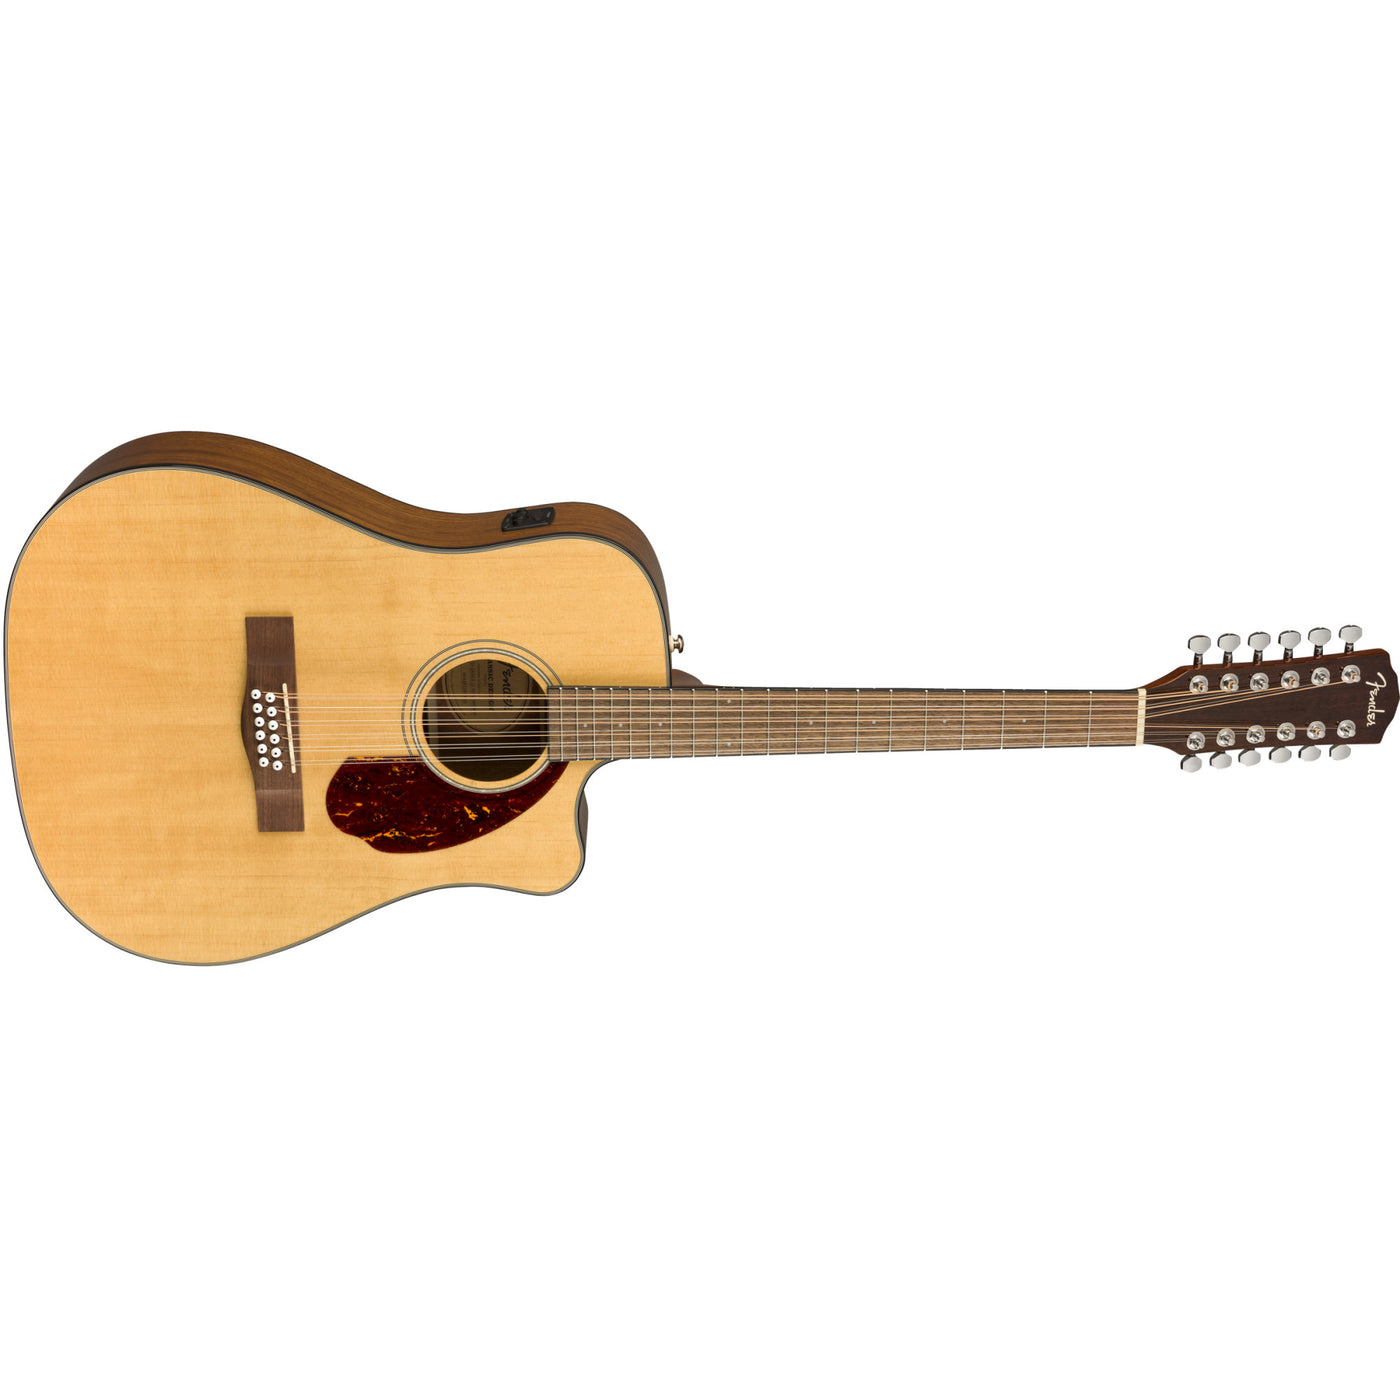 Fender CD-140SCE 12-String Acoustic Electric Guitar with Case, Natural (0970293321)